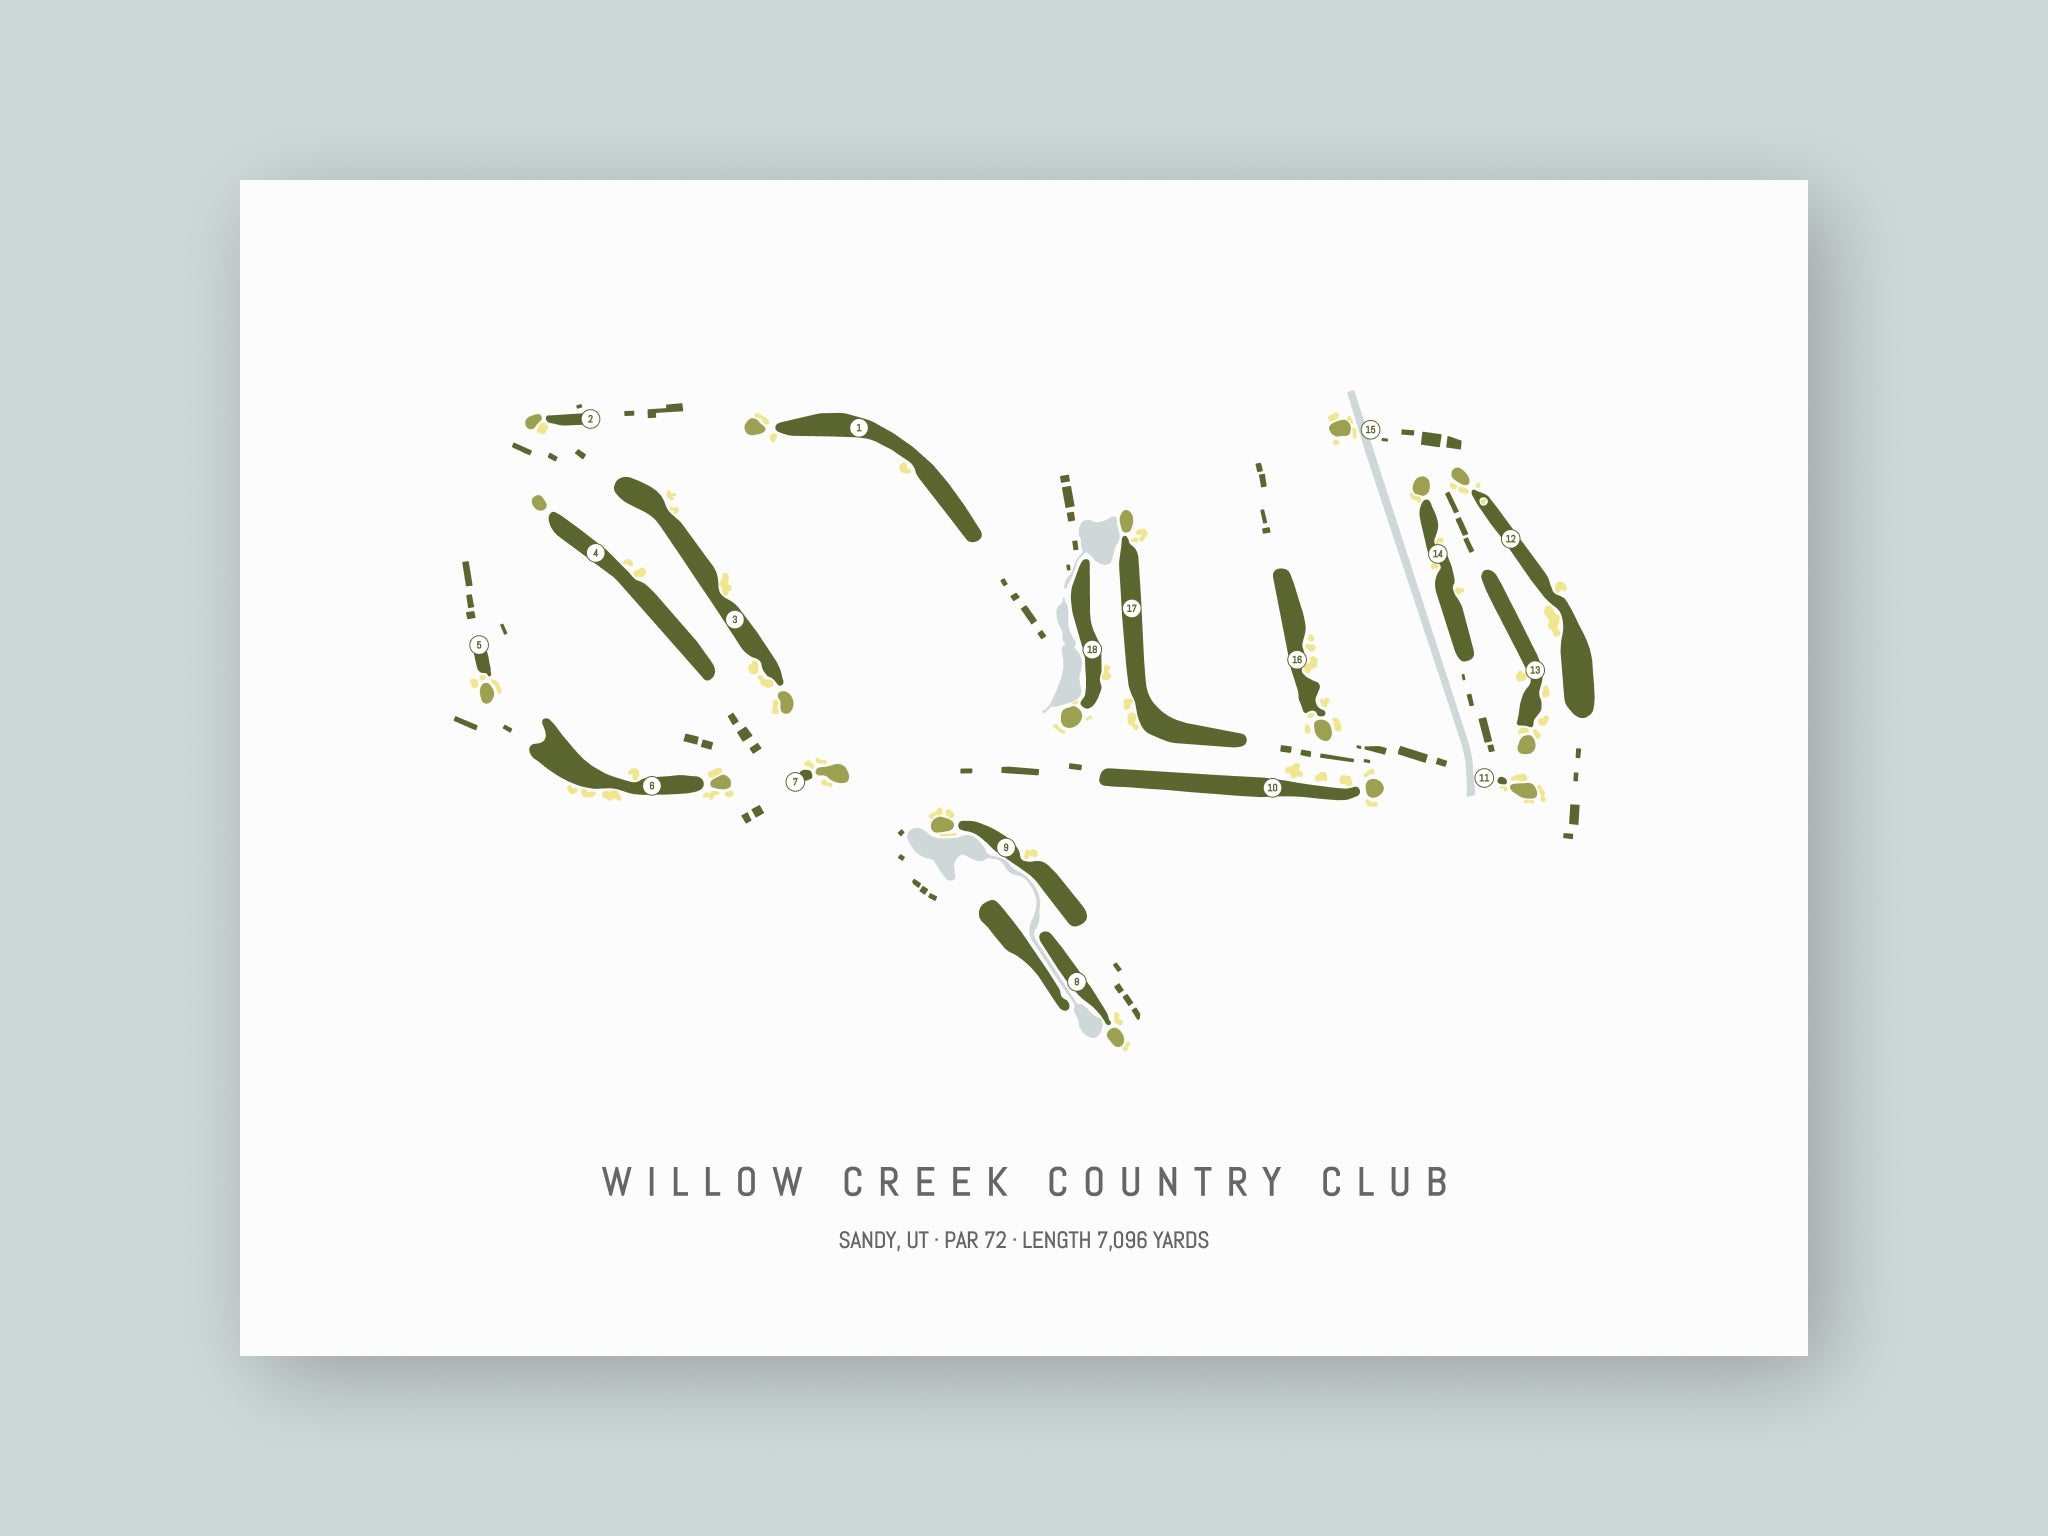 Willow-Creek-Country-Club-UT--Unframed-24x18-With-Hole-Numbers